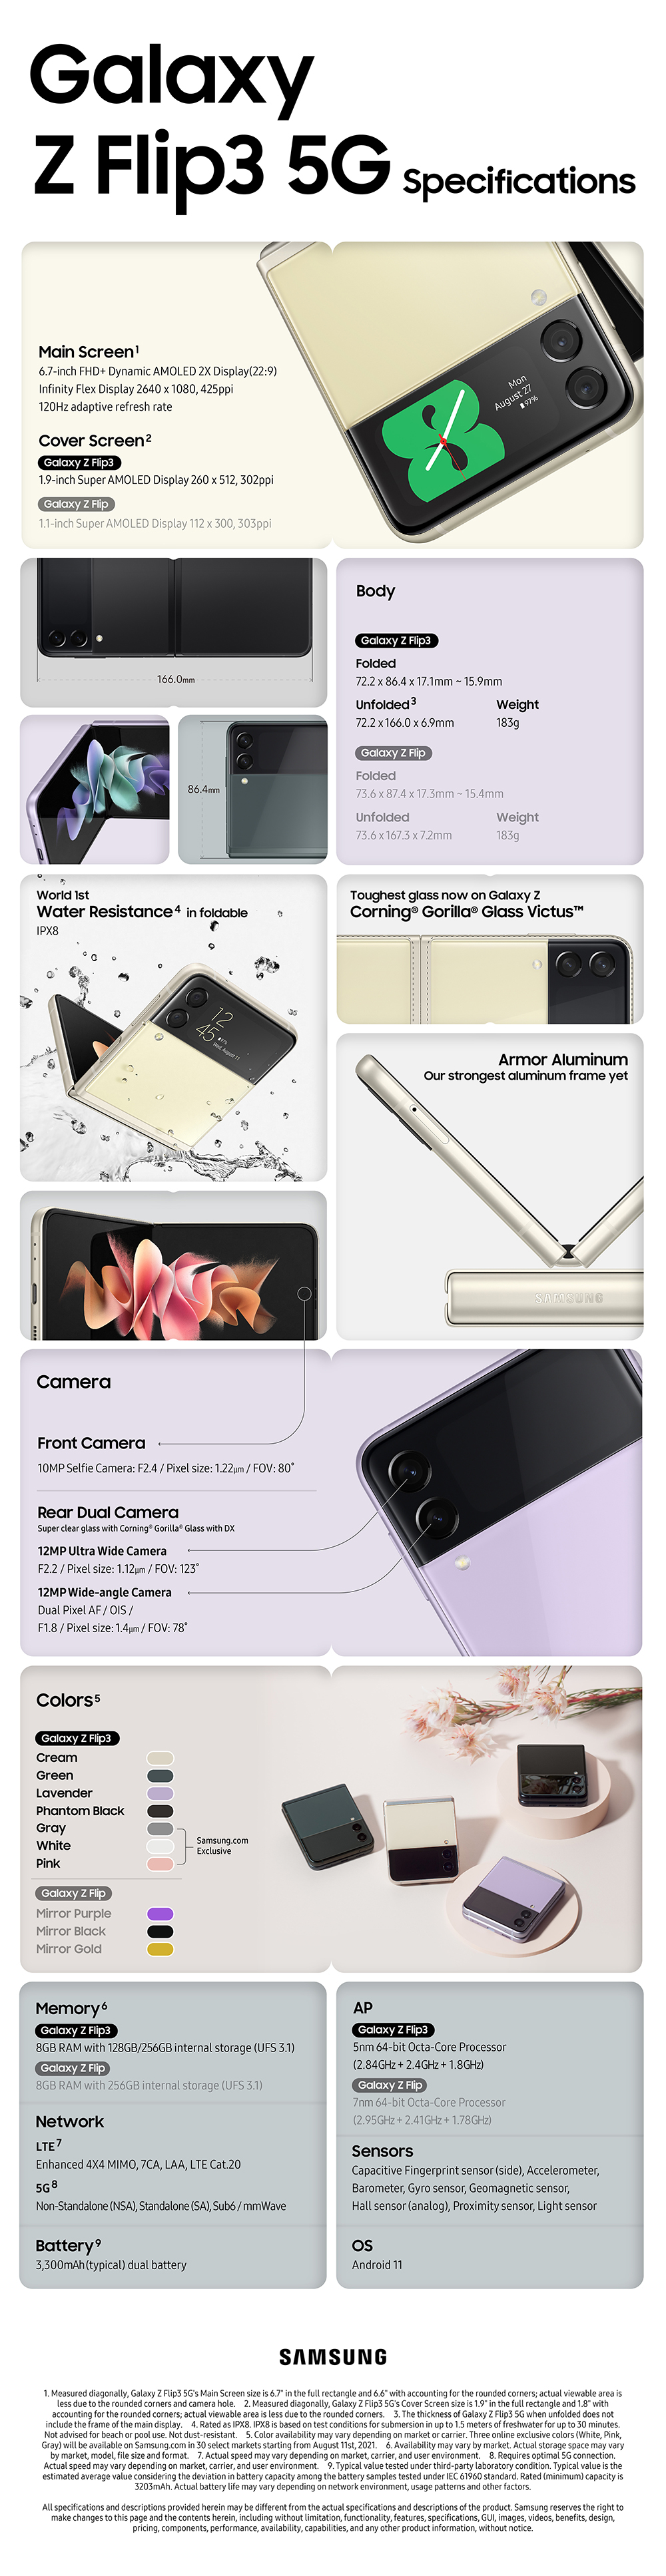 Galaxy Z Flip3 5G Product Specifications